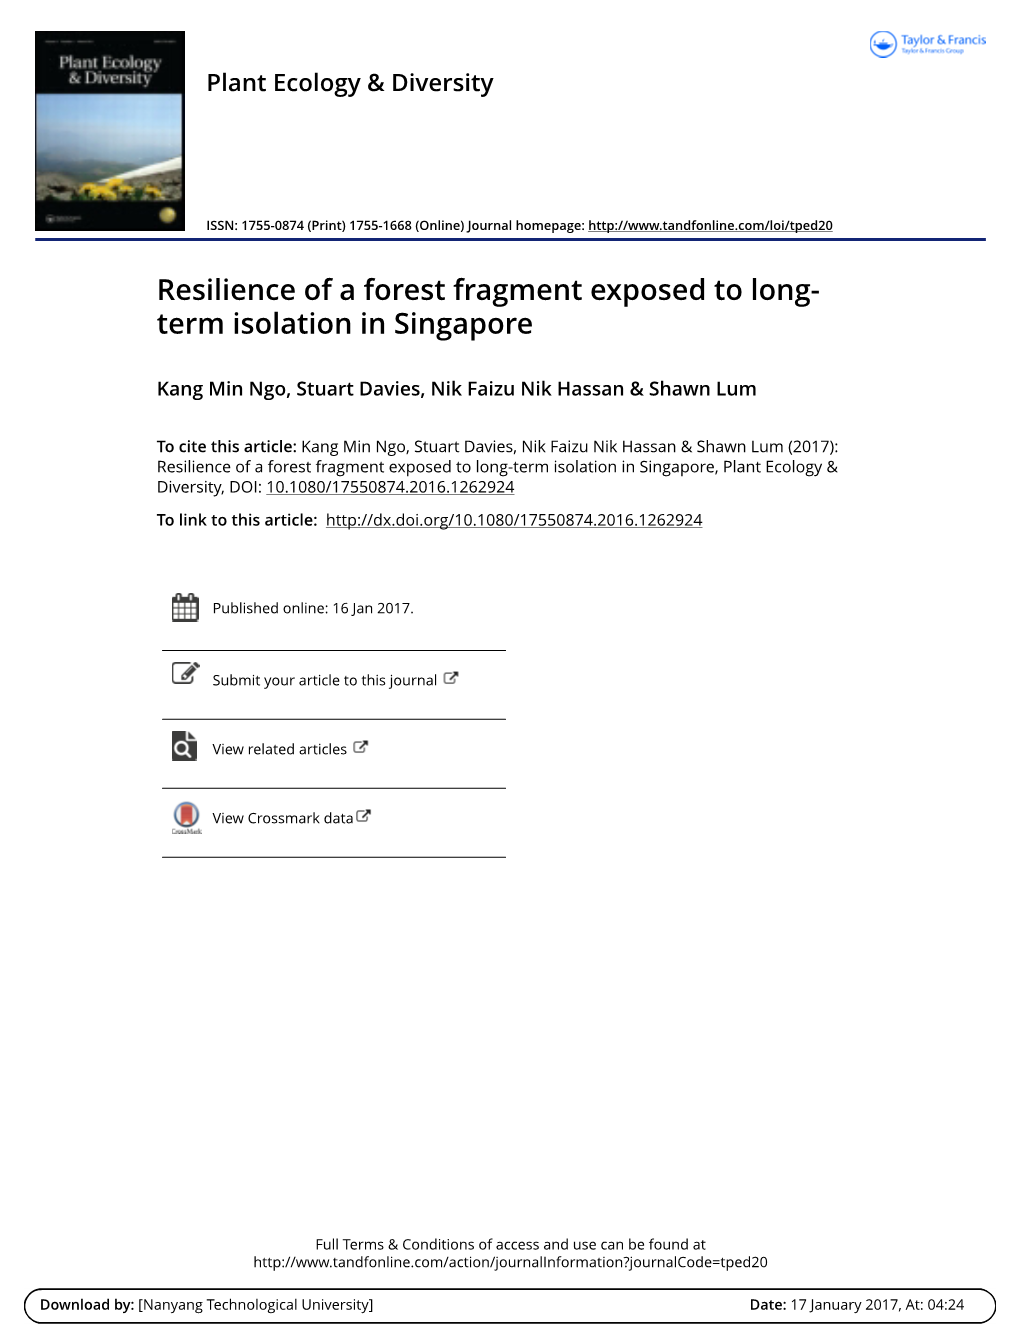 Resilience of a Forest Fragment Exposed to Long-Term Isolation in Singapore, Plant Ecology & Diversity, DOI: 10.1080/17550874.2016.1262924